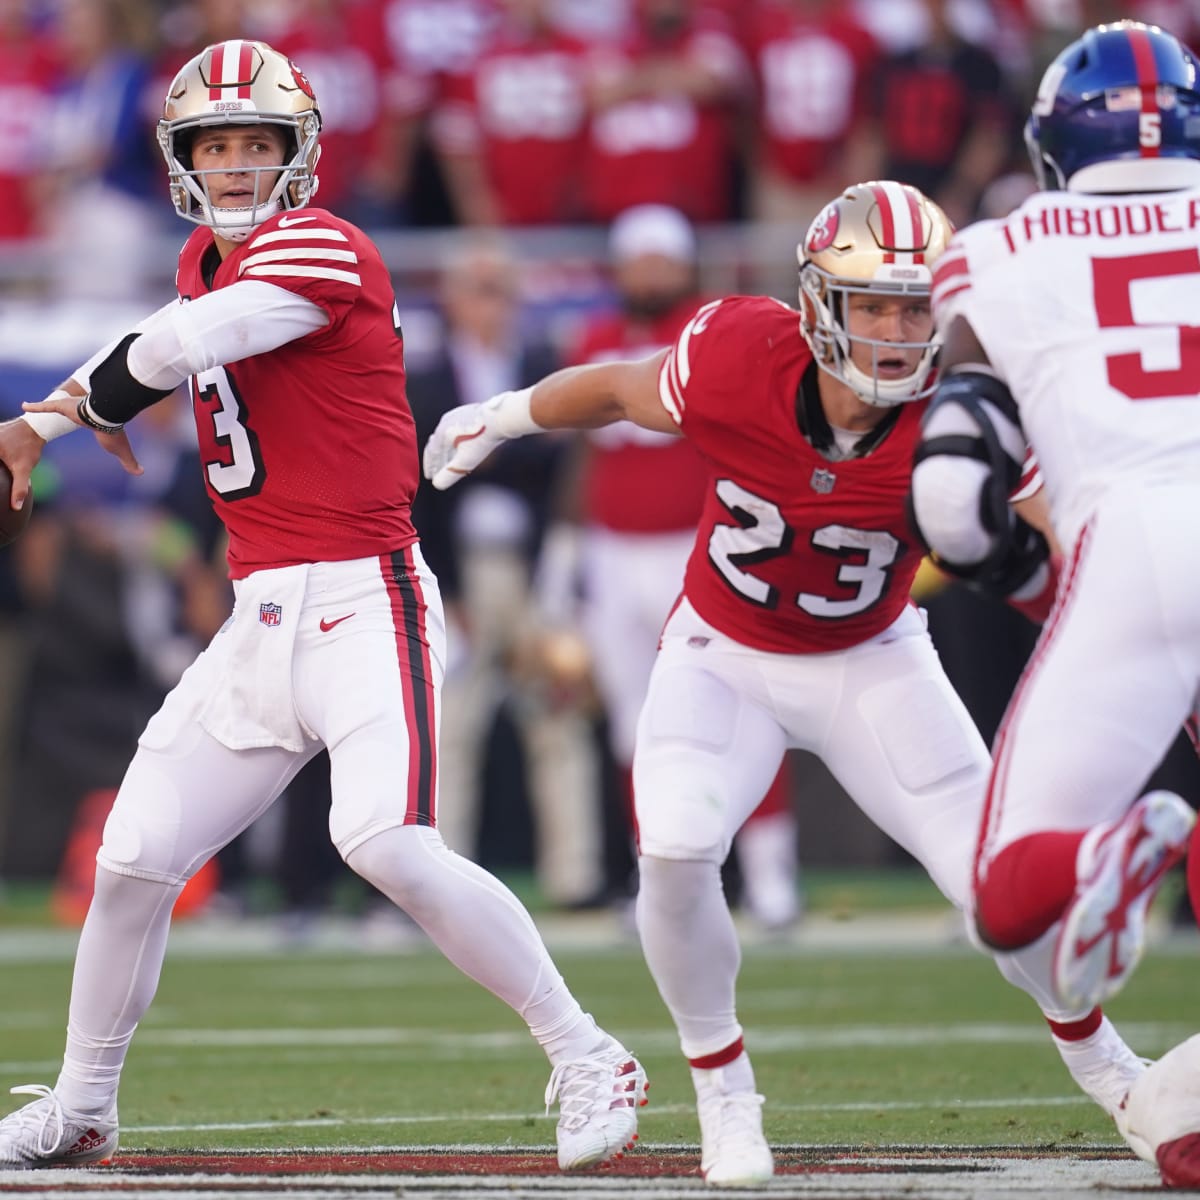 How Much Longer can 49ers QB Brock Purdy go Without Throwing a